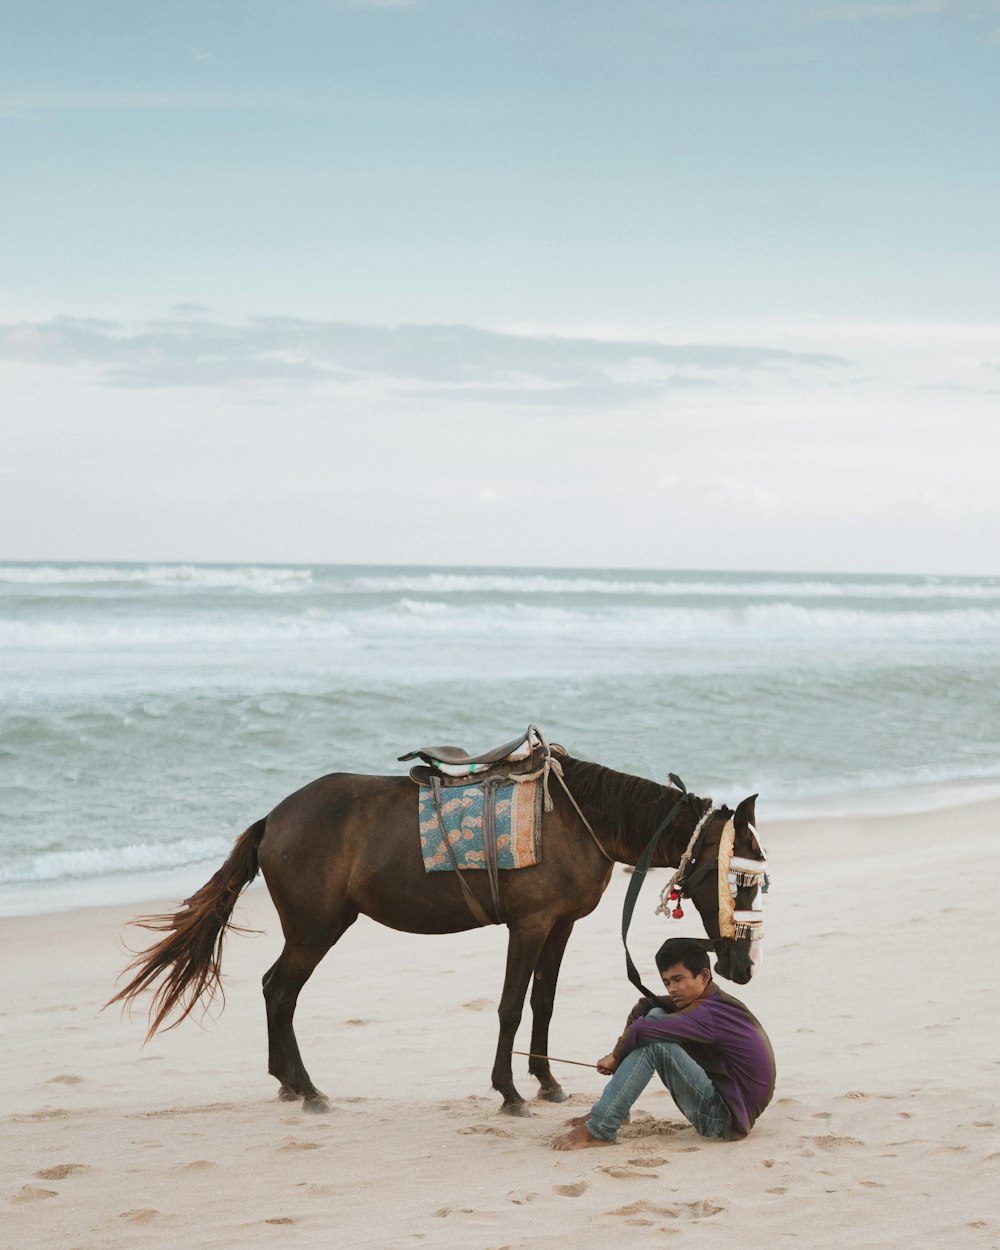 a person kneeling next to a horse on a beach